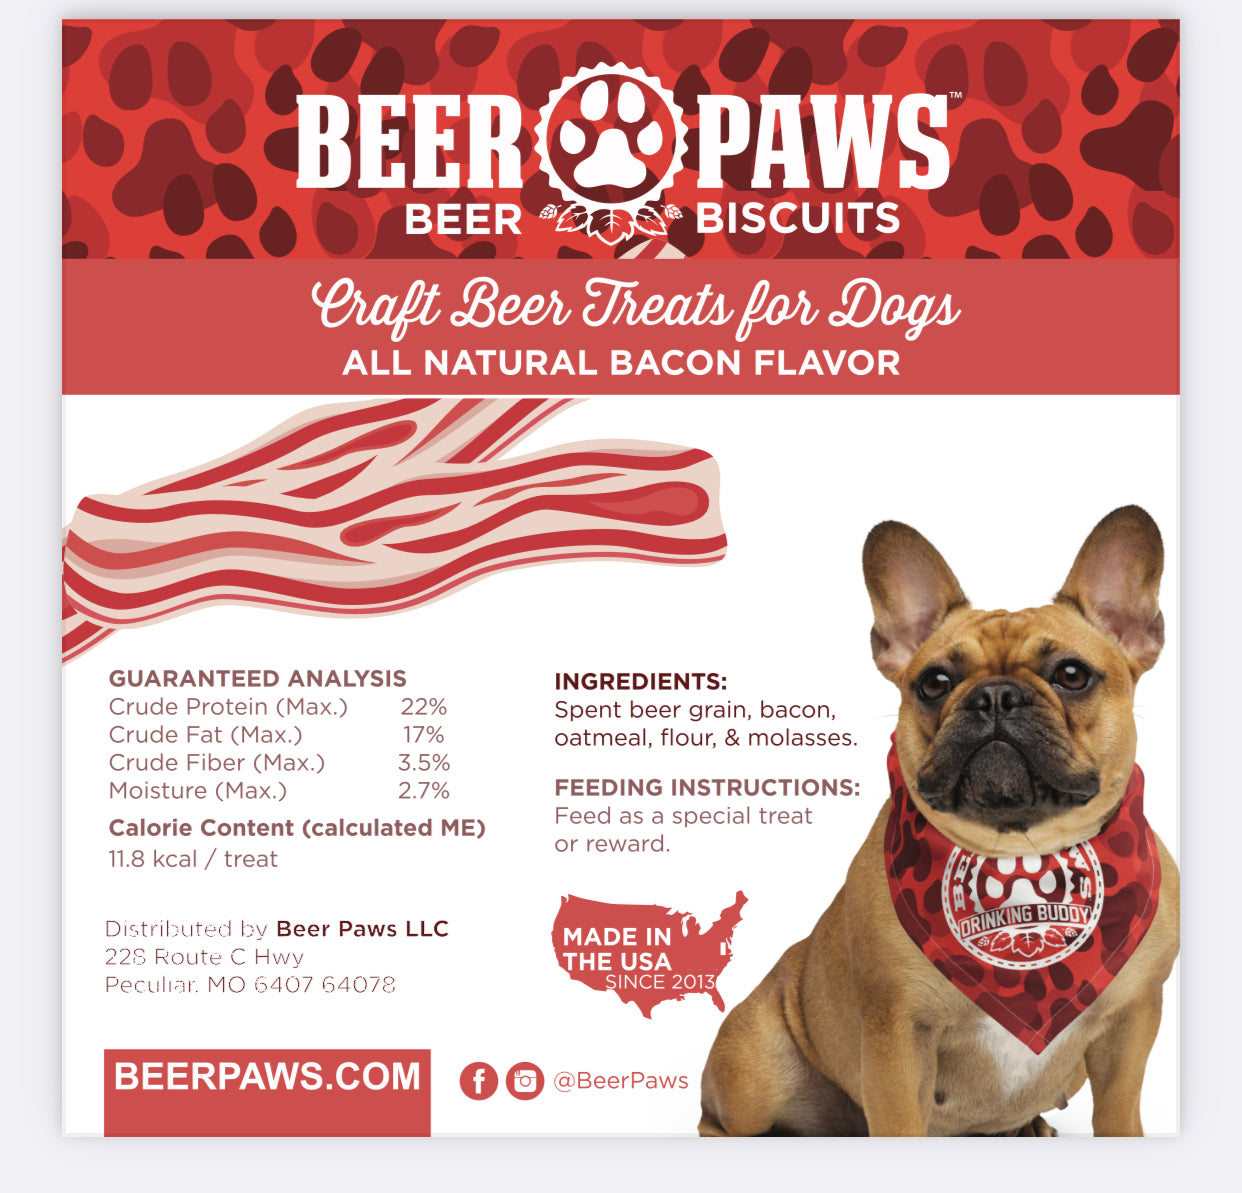 Beer Paws Bacon Beer Biscuits for Dogs